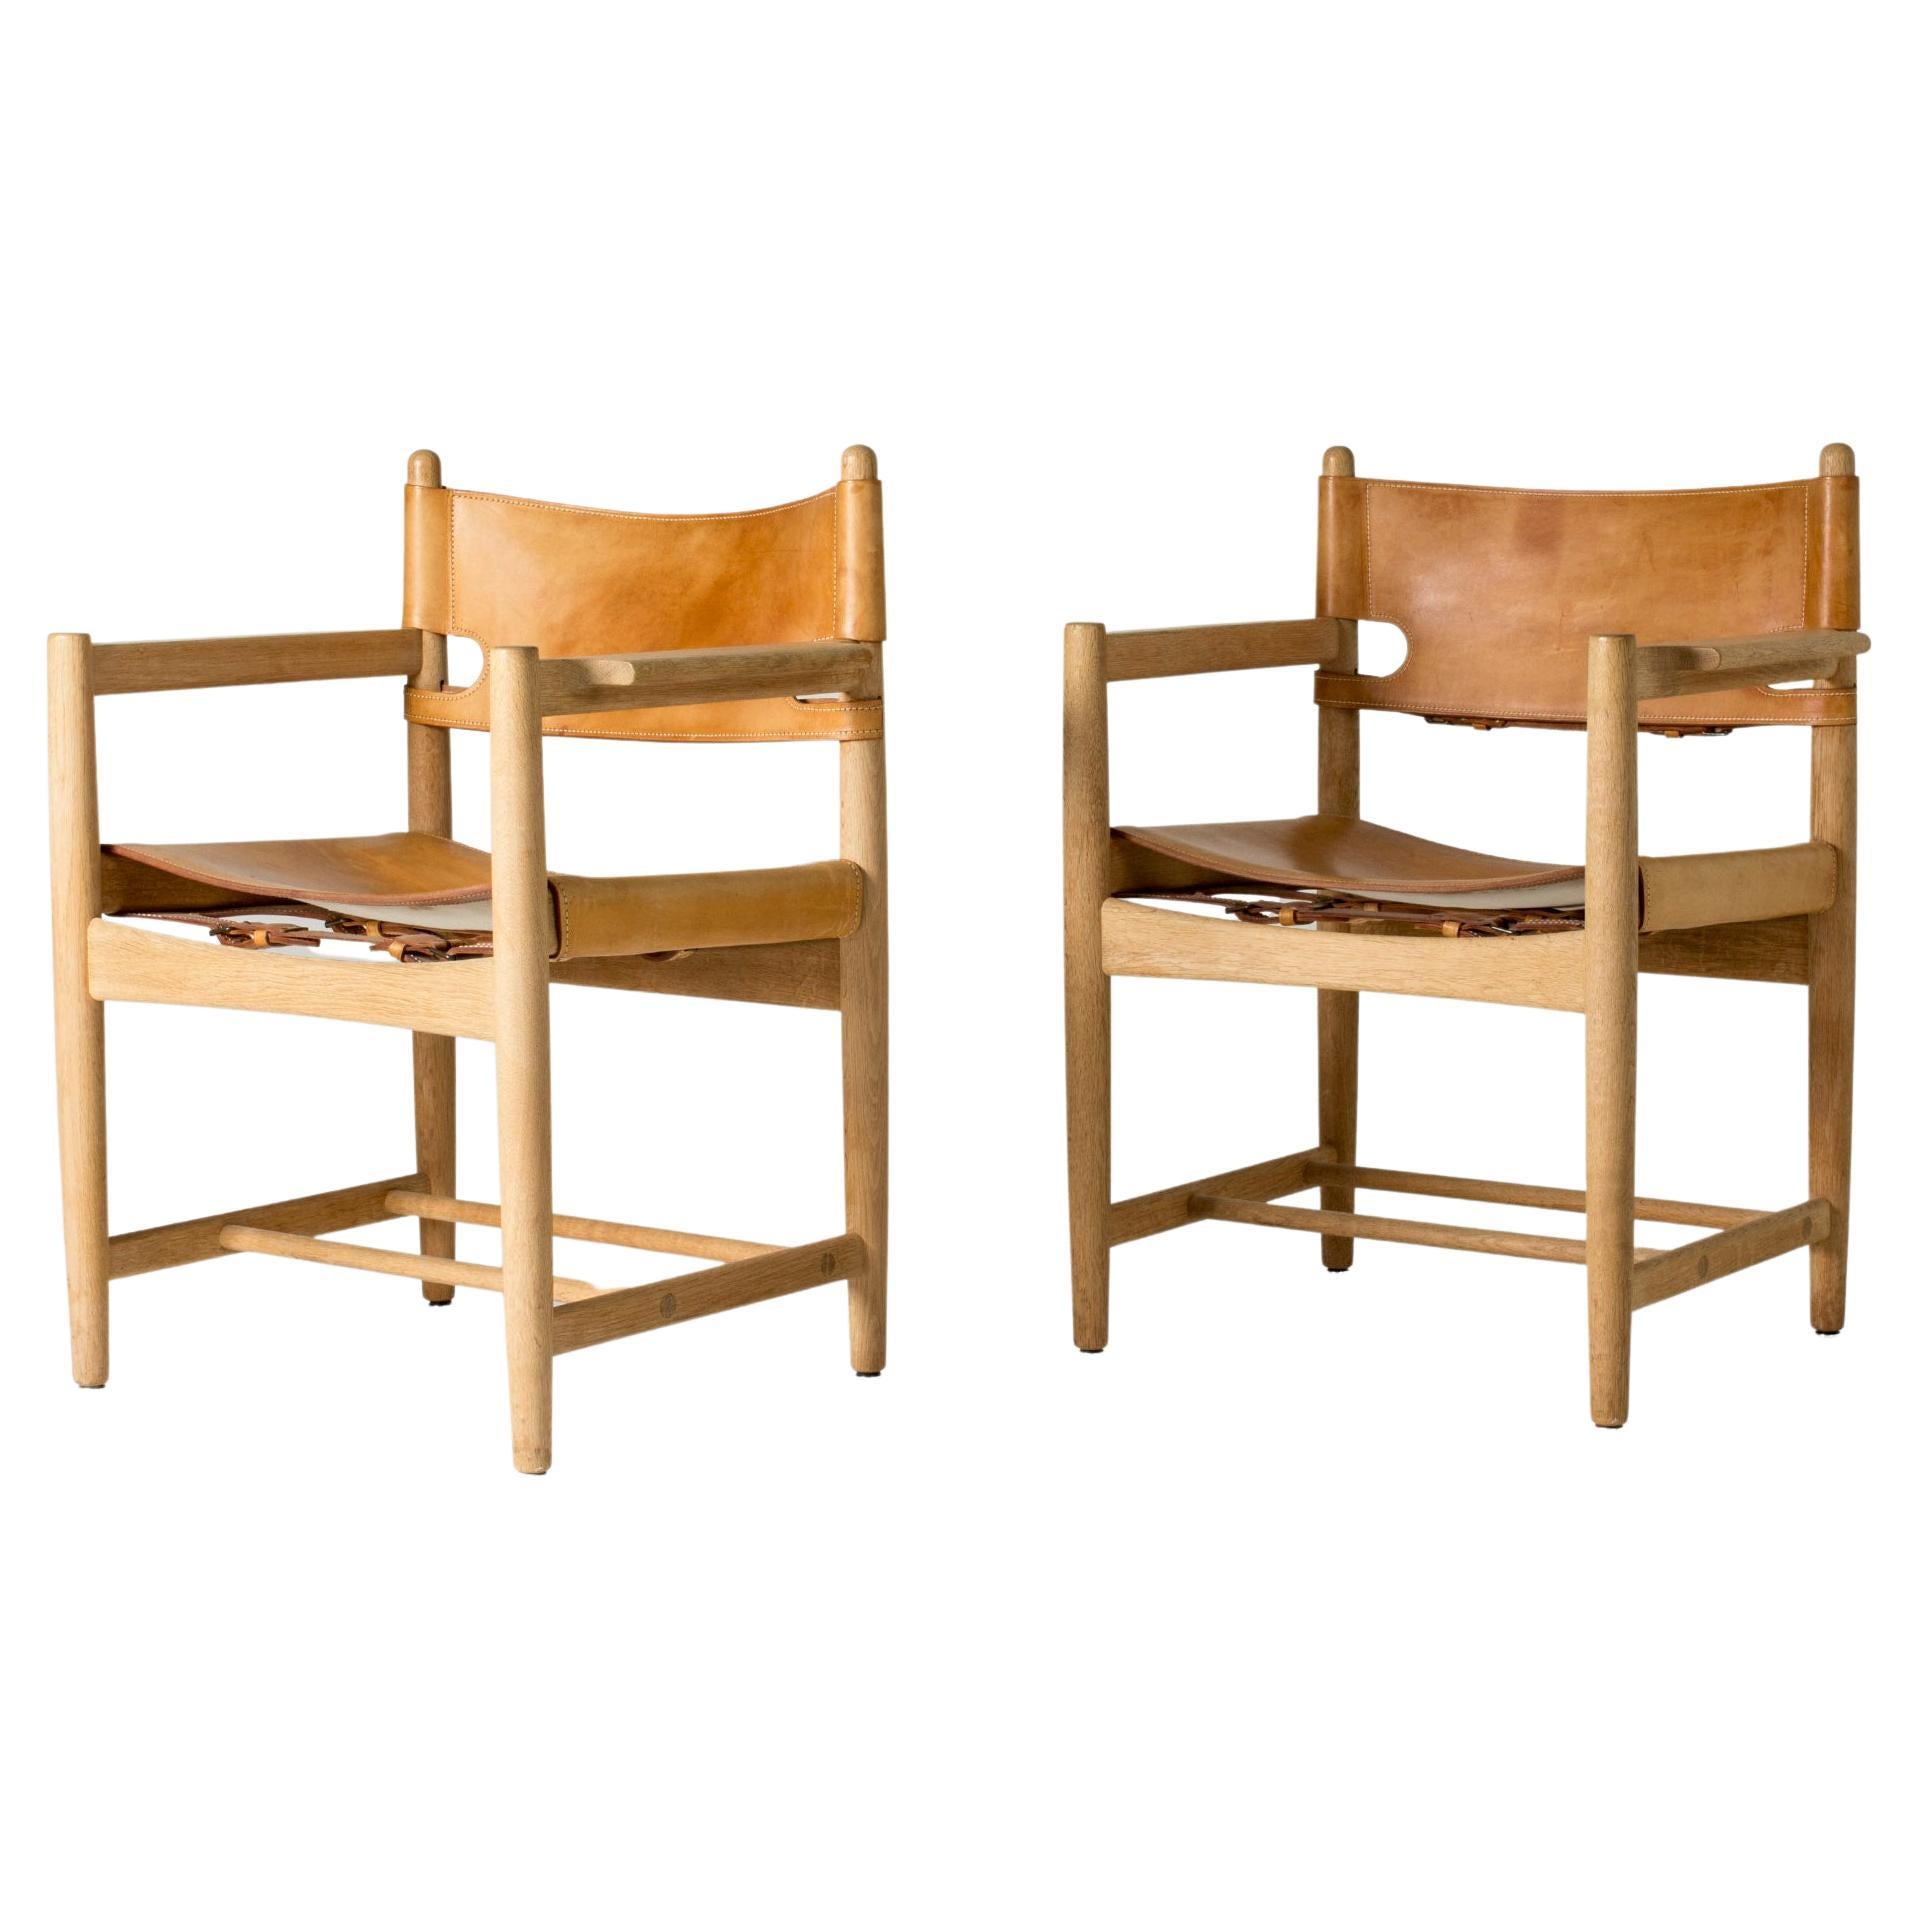 Pair of Midcentury Hunting Chairs by Børge Mogensen, Fredericia, Denmark, 1960s